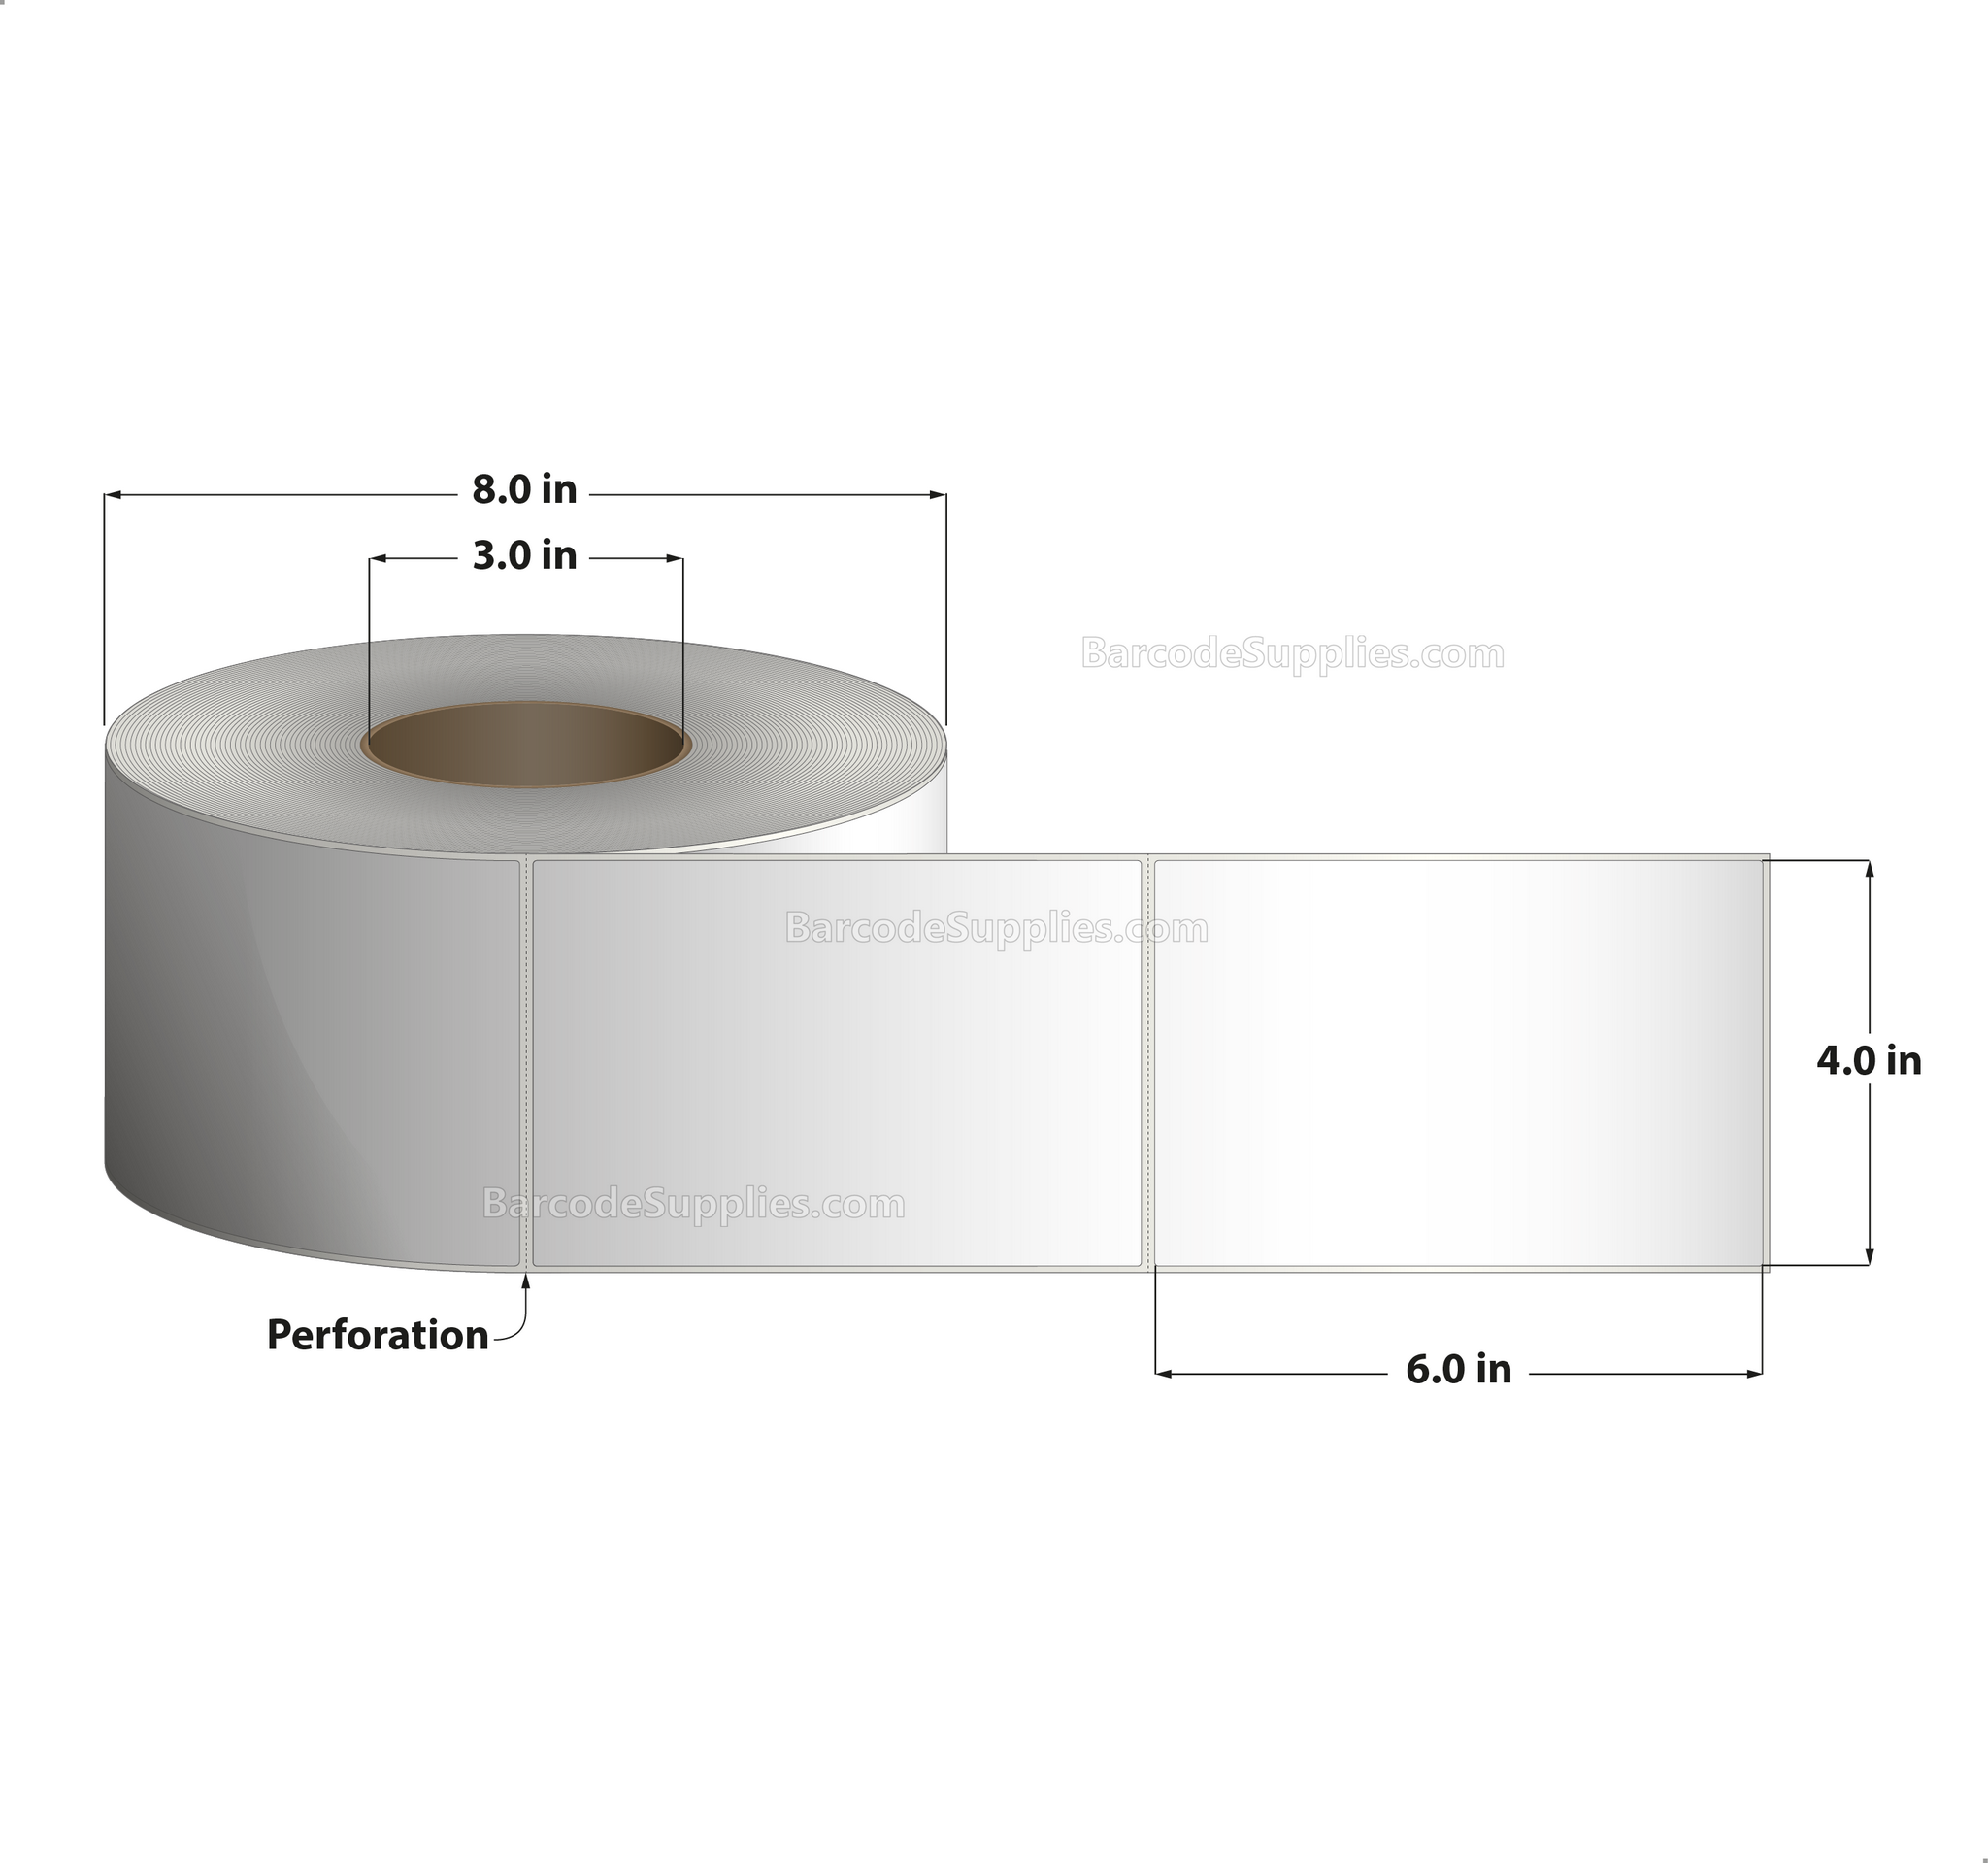 4 x 6 Direct Thermal White Labels With Permanent Acrylic Adhesive - Perforated - 1000 Labels Per Roll - Carton Of 4 Rolls - 4000 Labels Total - MPN: DT46-1